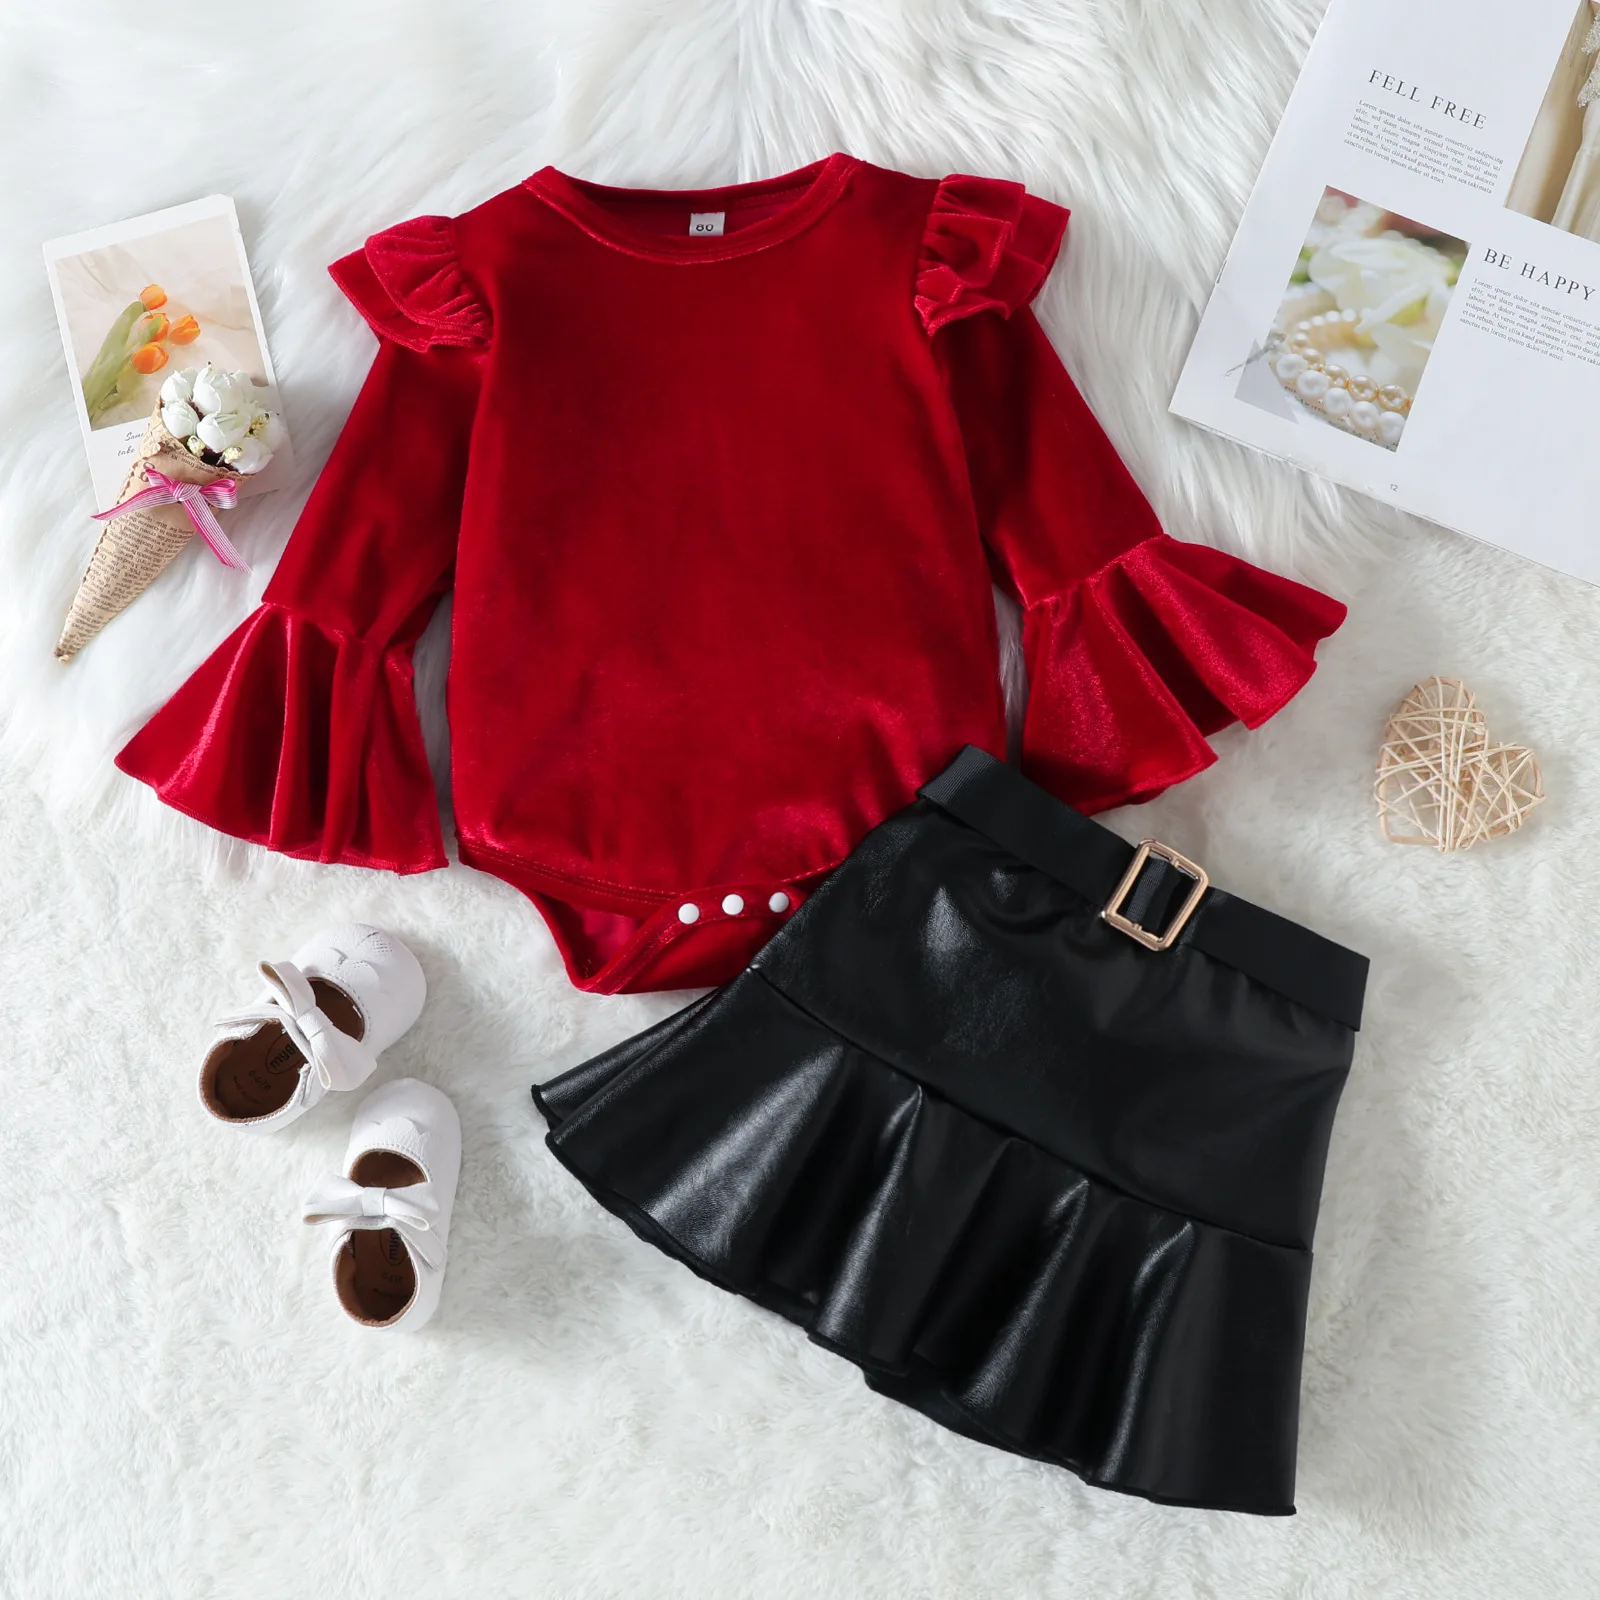 Hot selling toddler girls clothing sets boutique two-piece fall outfits fashion leather skirt suits kids casual clothes